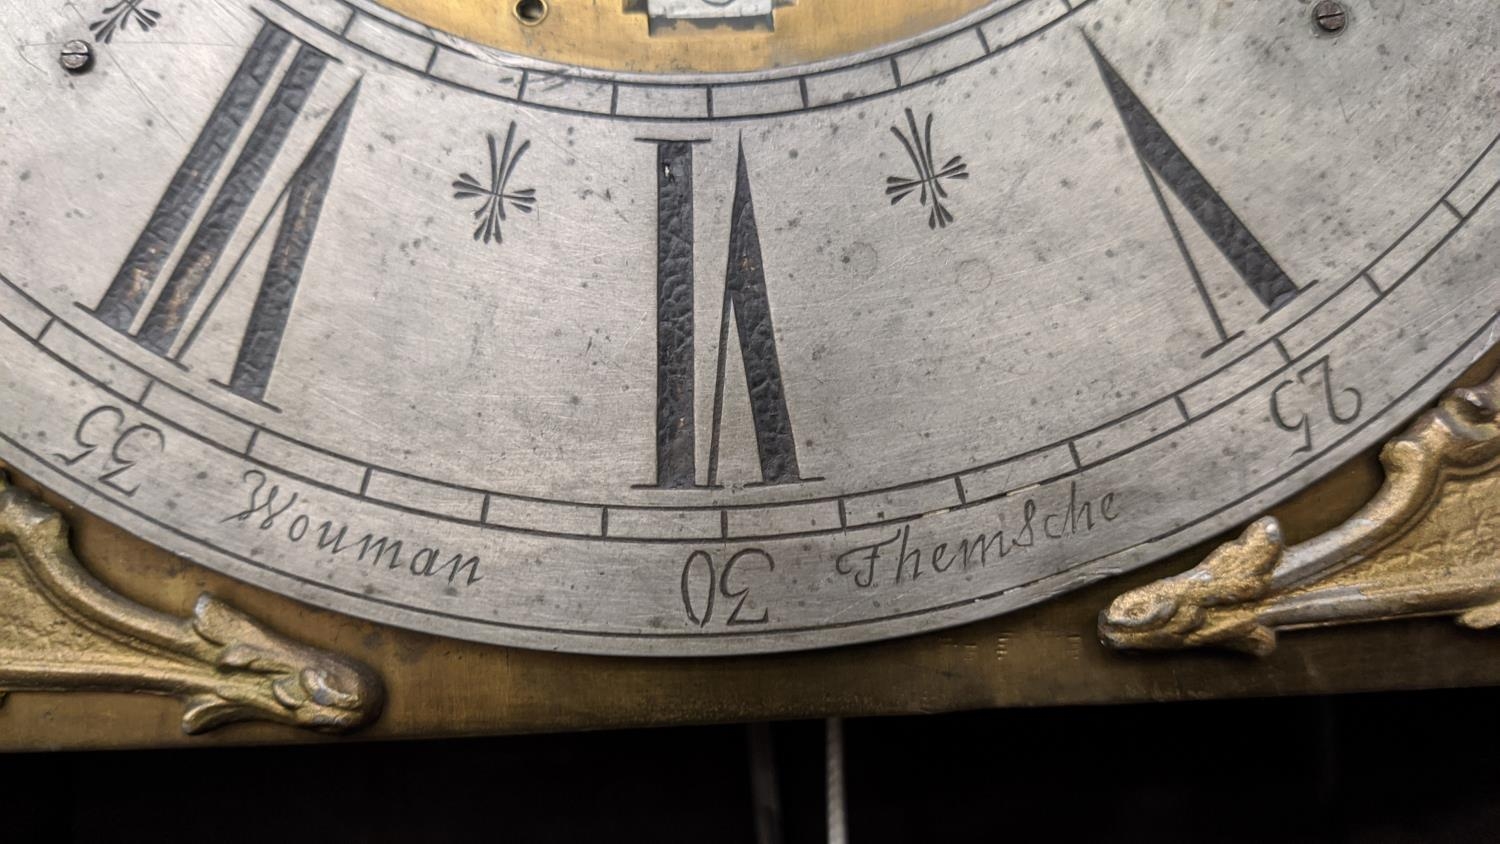 LONGCASE CLOCK, 18th century Flemish, eight day movement, silvered chapter dial, inscribed Wouman - Image 7 of 12